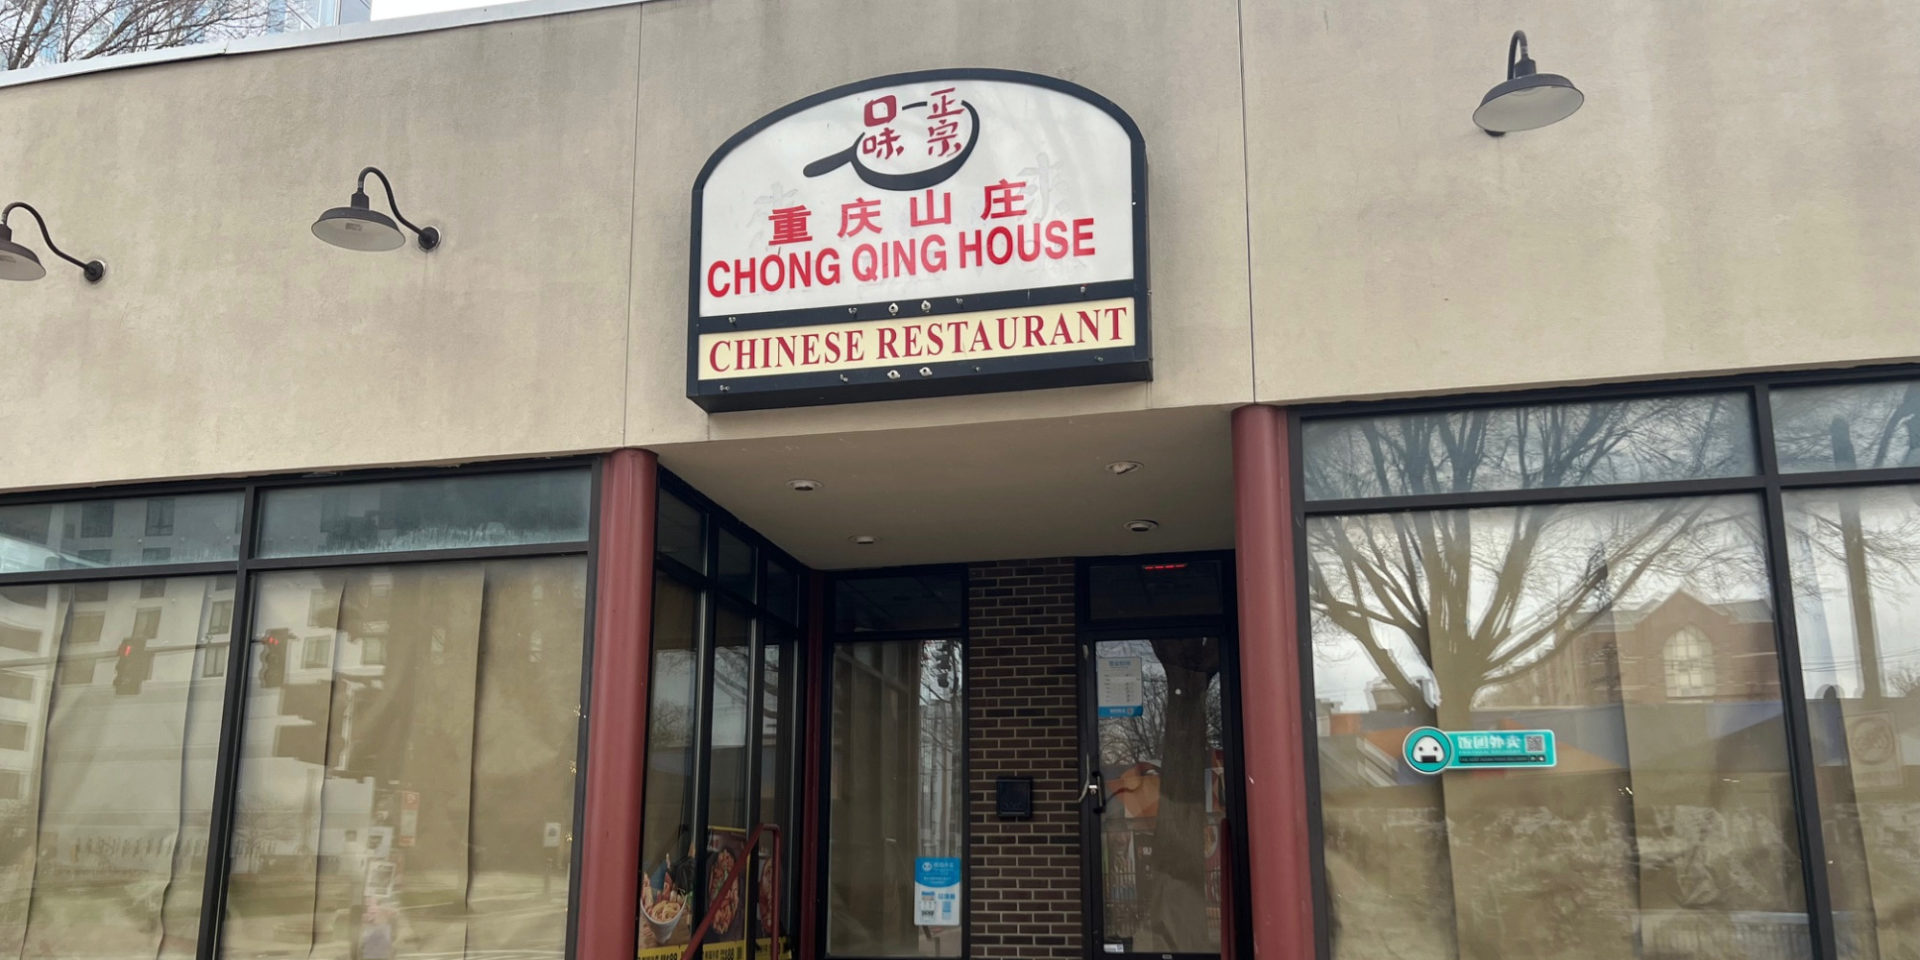 Chong Qing House restaurant on Green Street is closed and there is brown paper in the windows.